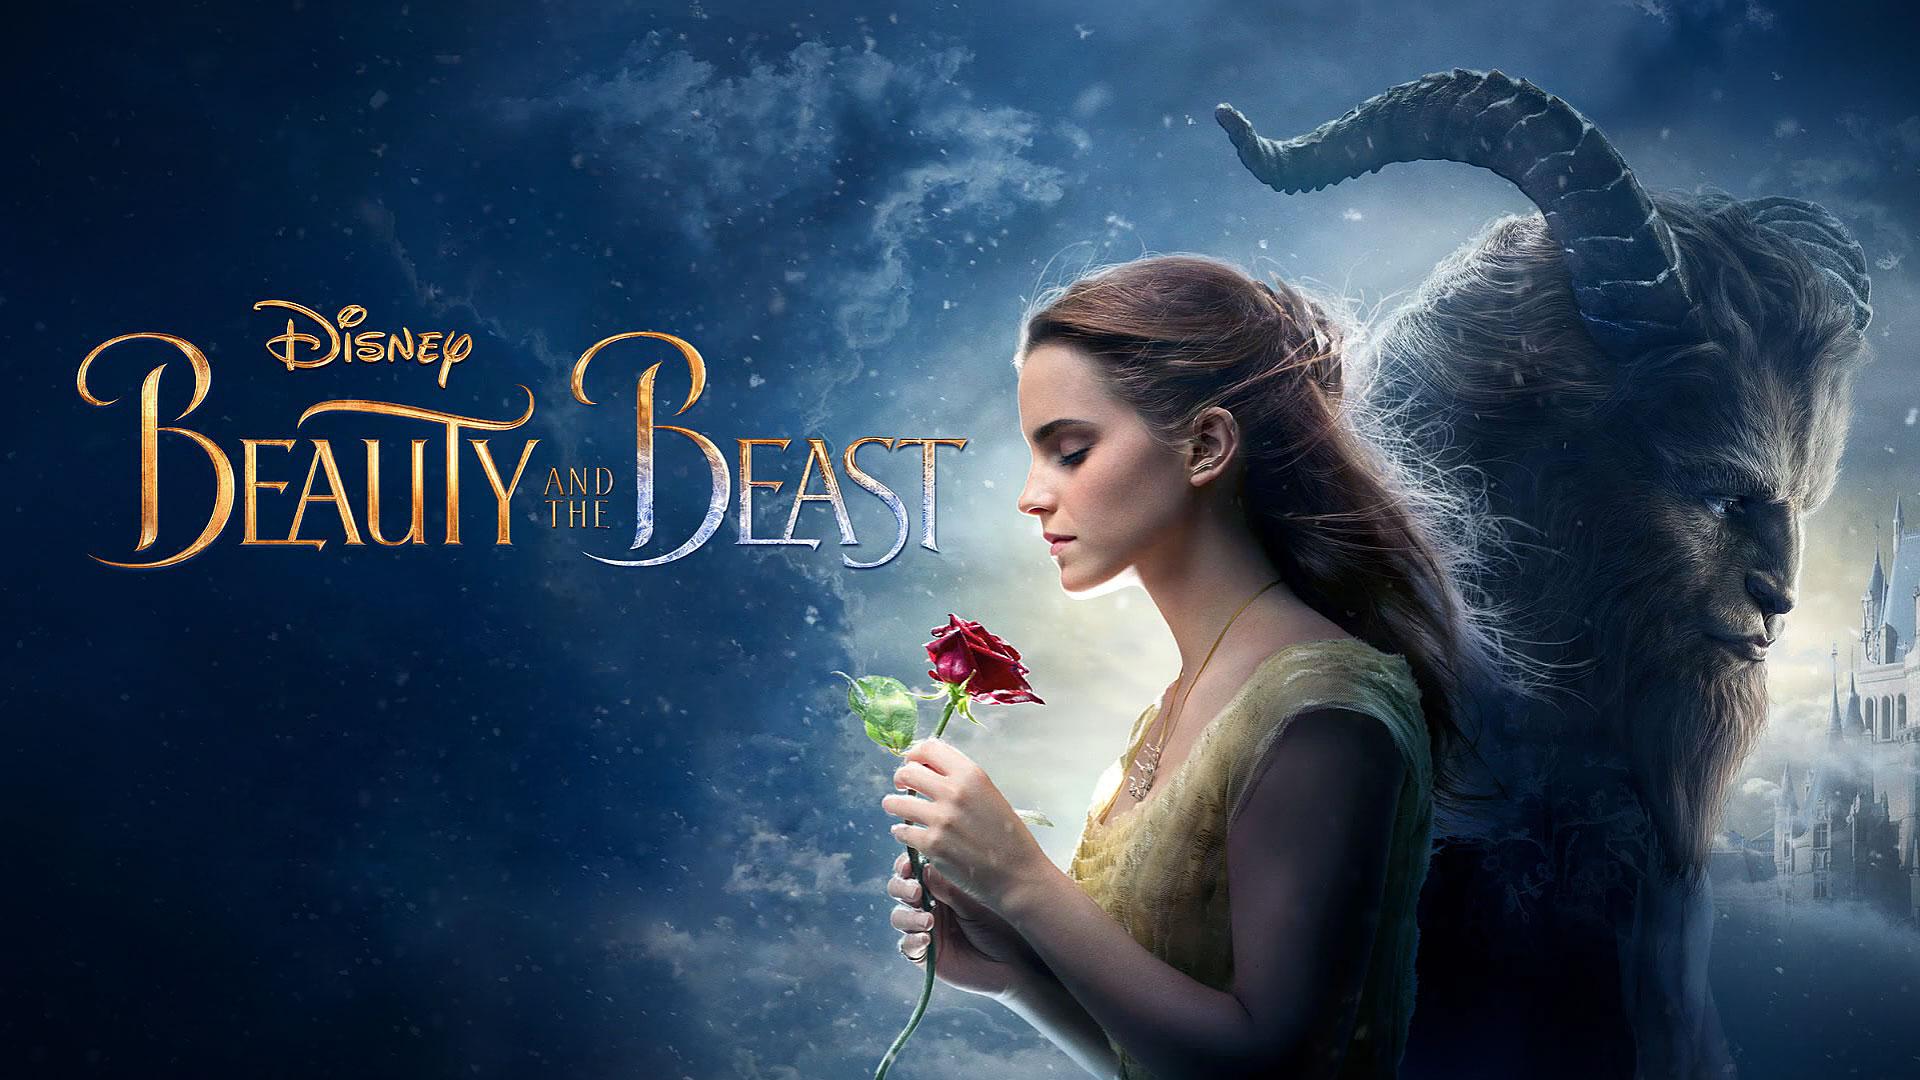 18 New Beauty and the Beast 2017 Movie HD Desktop Wallpapers